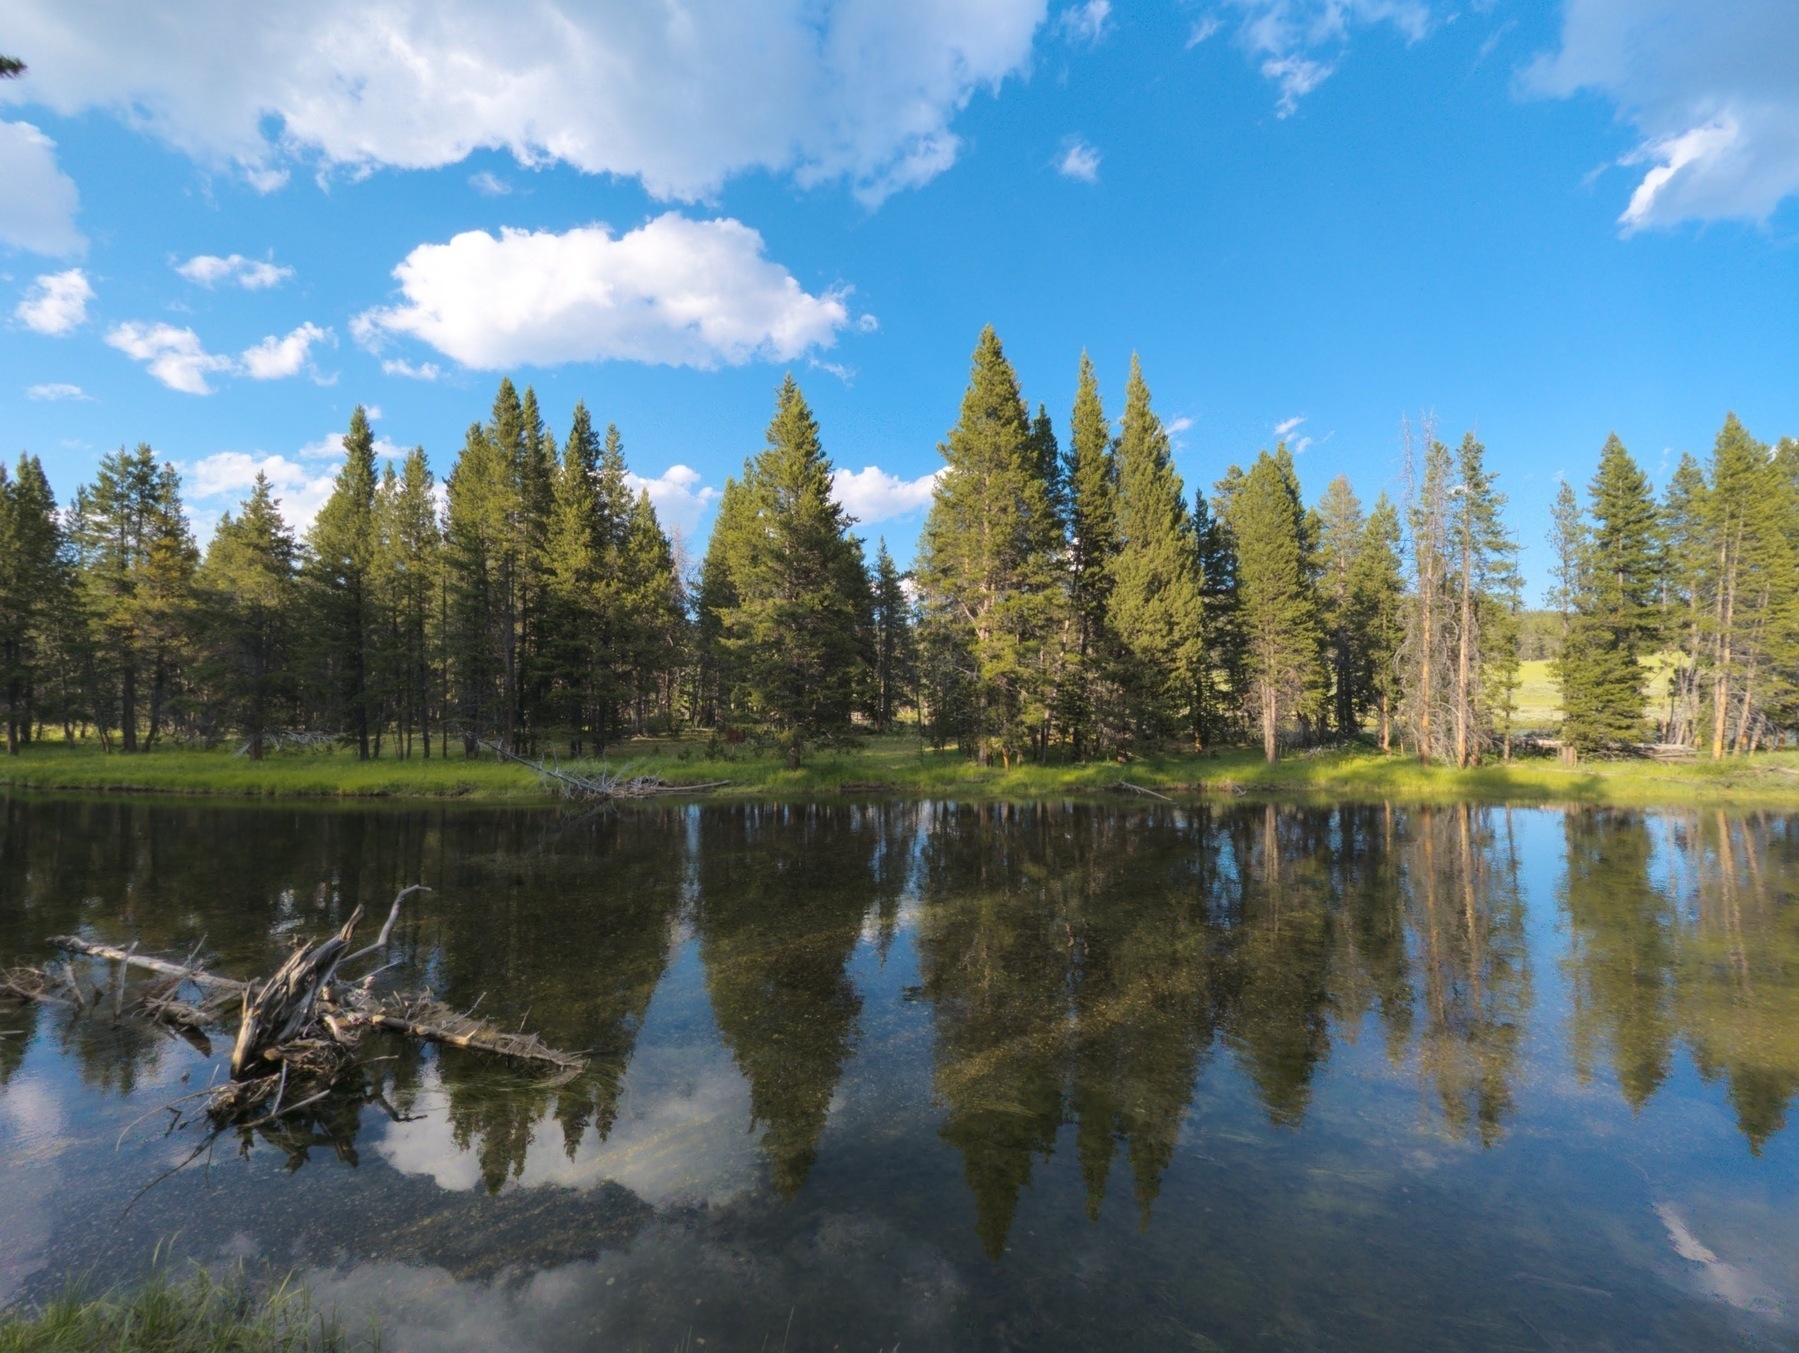 Calm river in the foreground and pine trees along the far bank.